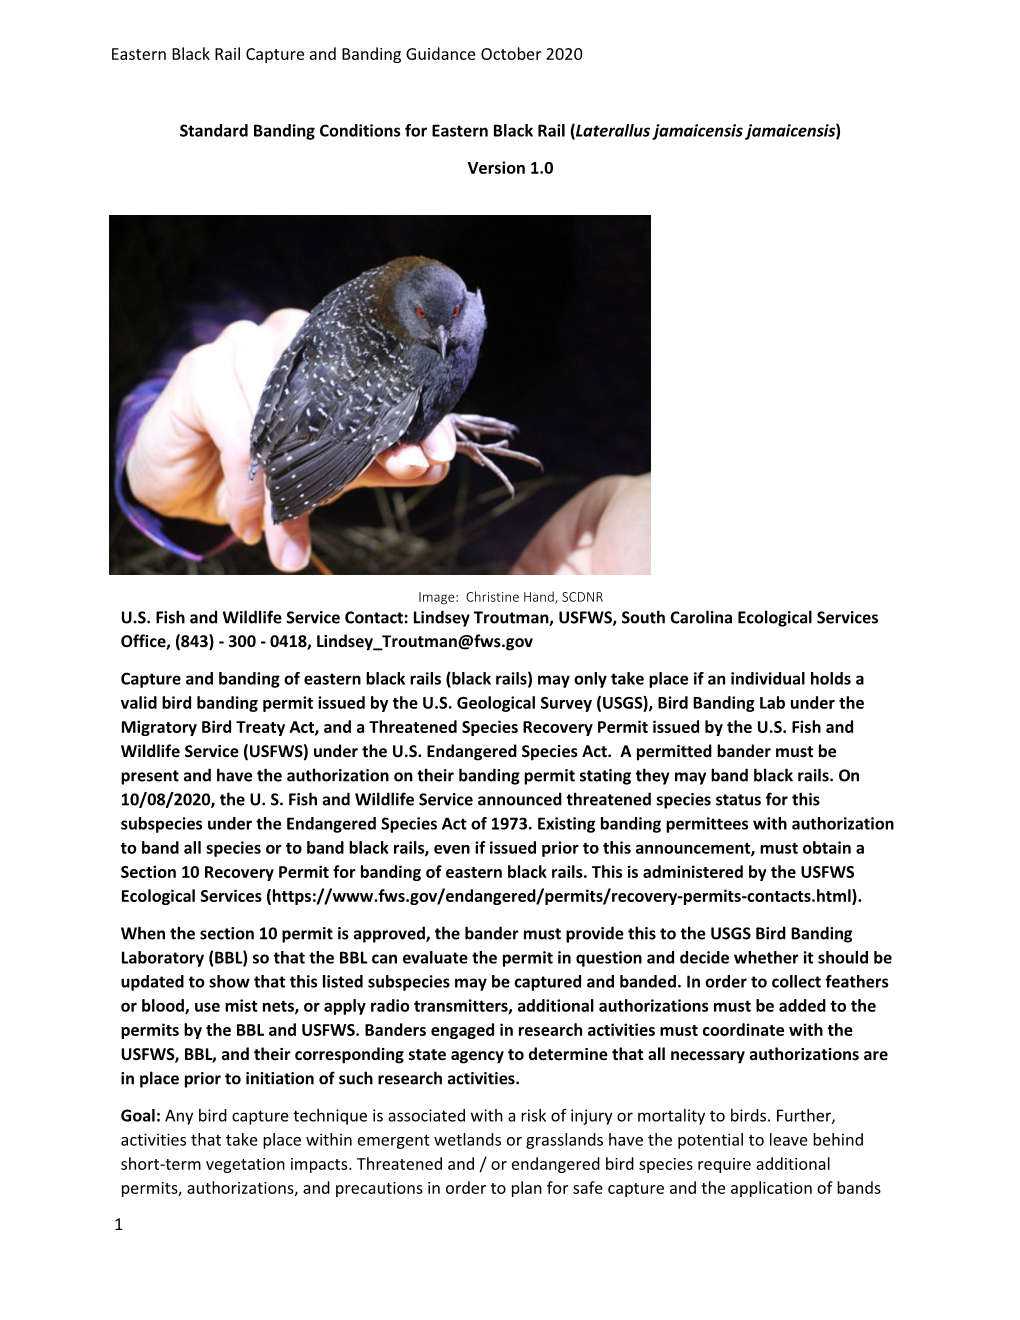 Eastern Black Rail Capture and Banding Guidance October 2020 1